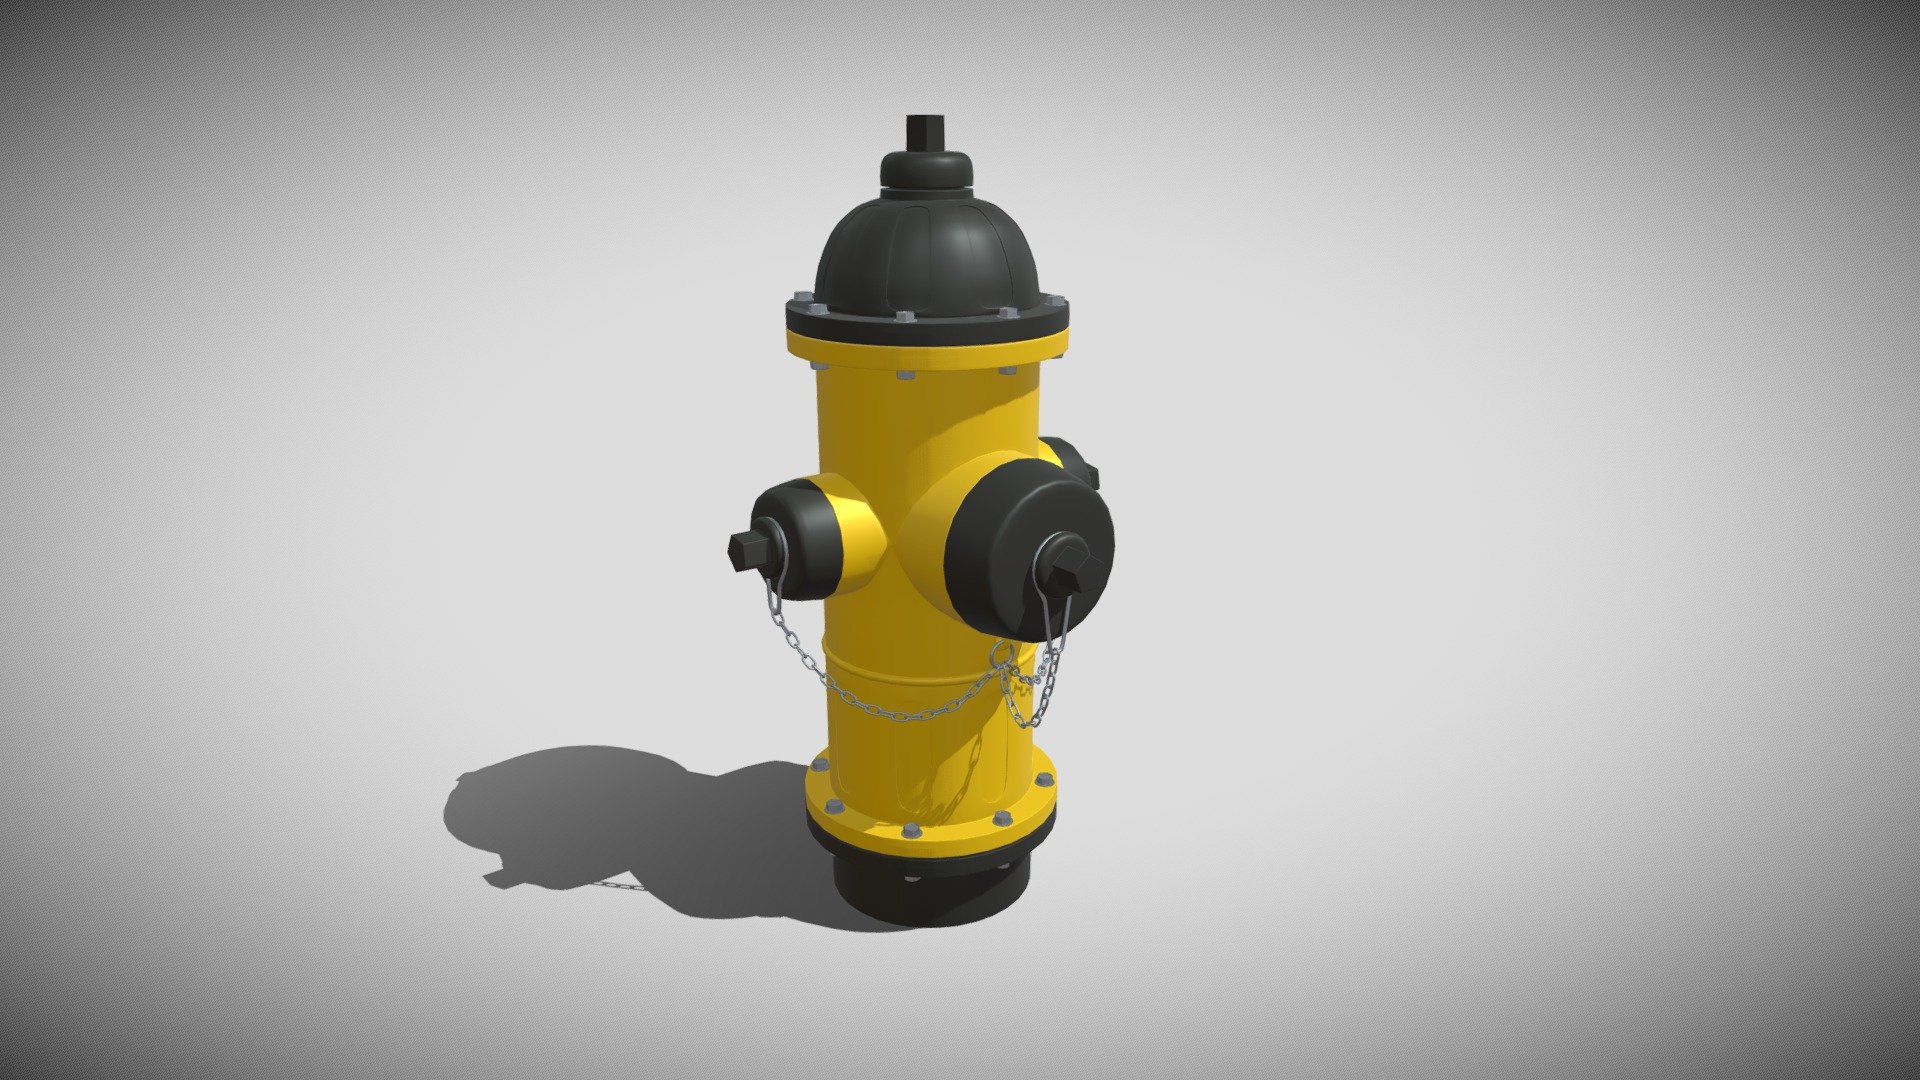 Detailed model of a Fire Hydrant, modeled in Cinema 4D.The model was created using approximate real world dimensions.

The model has 46,402 polys and 46,288 vertices.

An additional file has been provided containing the original Cinema 4D project files and other 3d export files such as 3ds, fbx and obj 3d model